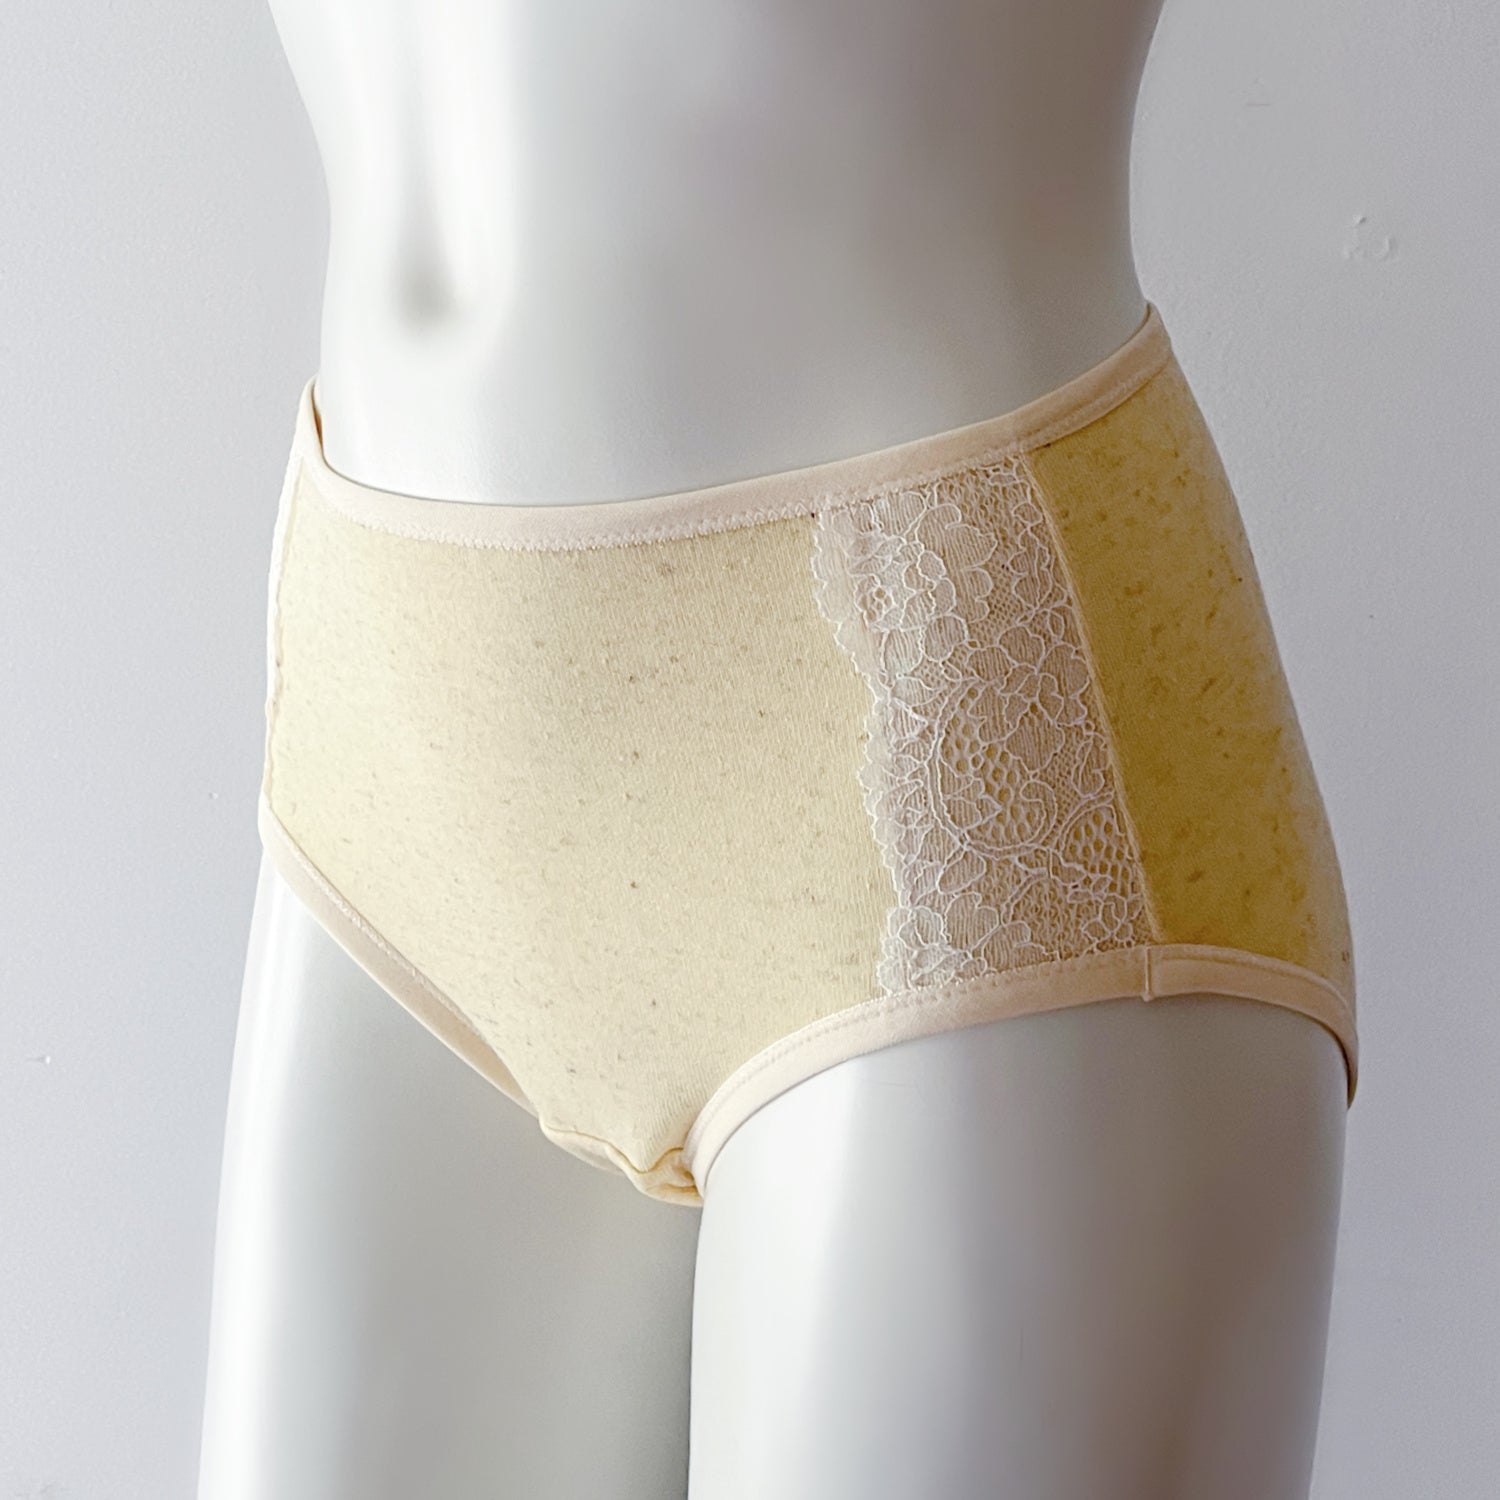 Size SMALL/ Medium Vintage Underwear Ladies Polyester Knickers Made in Era  1980-s -  Canada